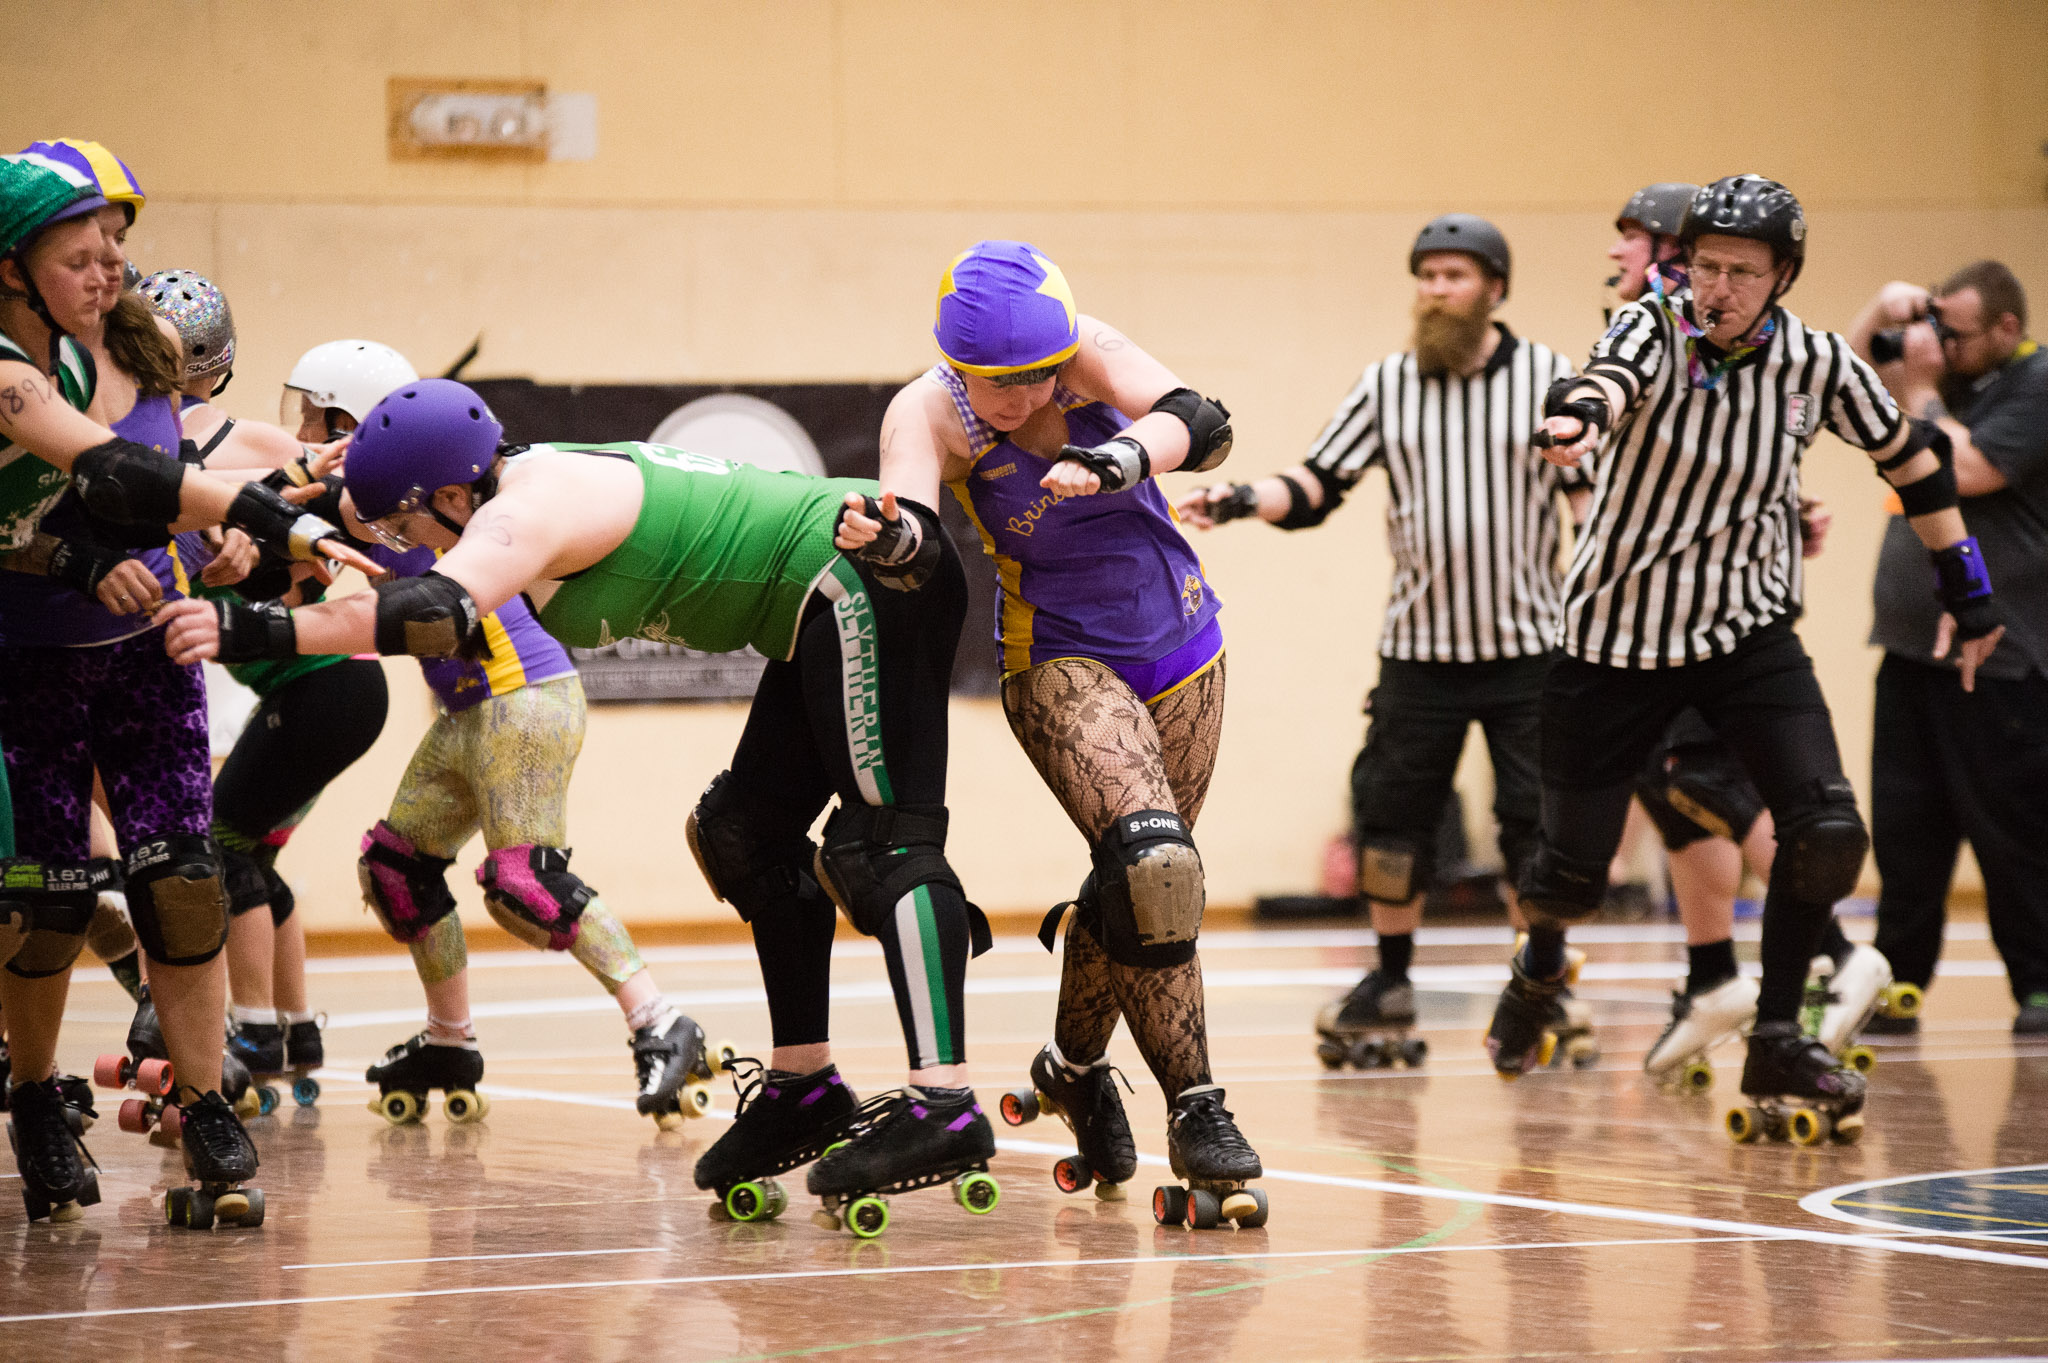 CRDL - Brindabelters v Surly Griffin. Photographer: Brett Sargeant, D-eye Photography